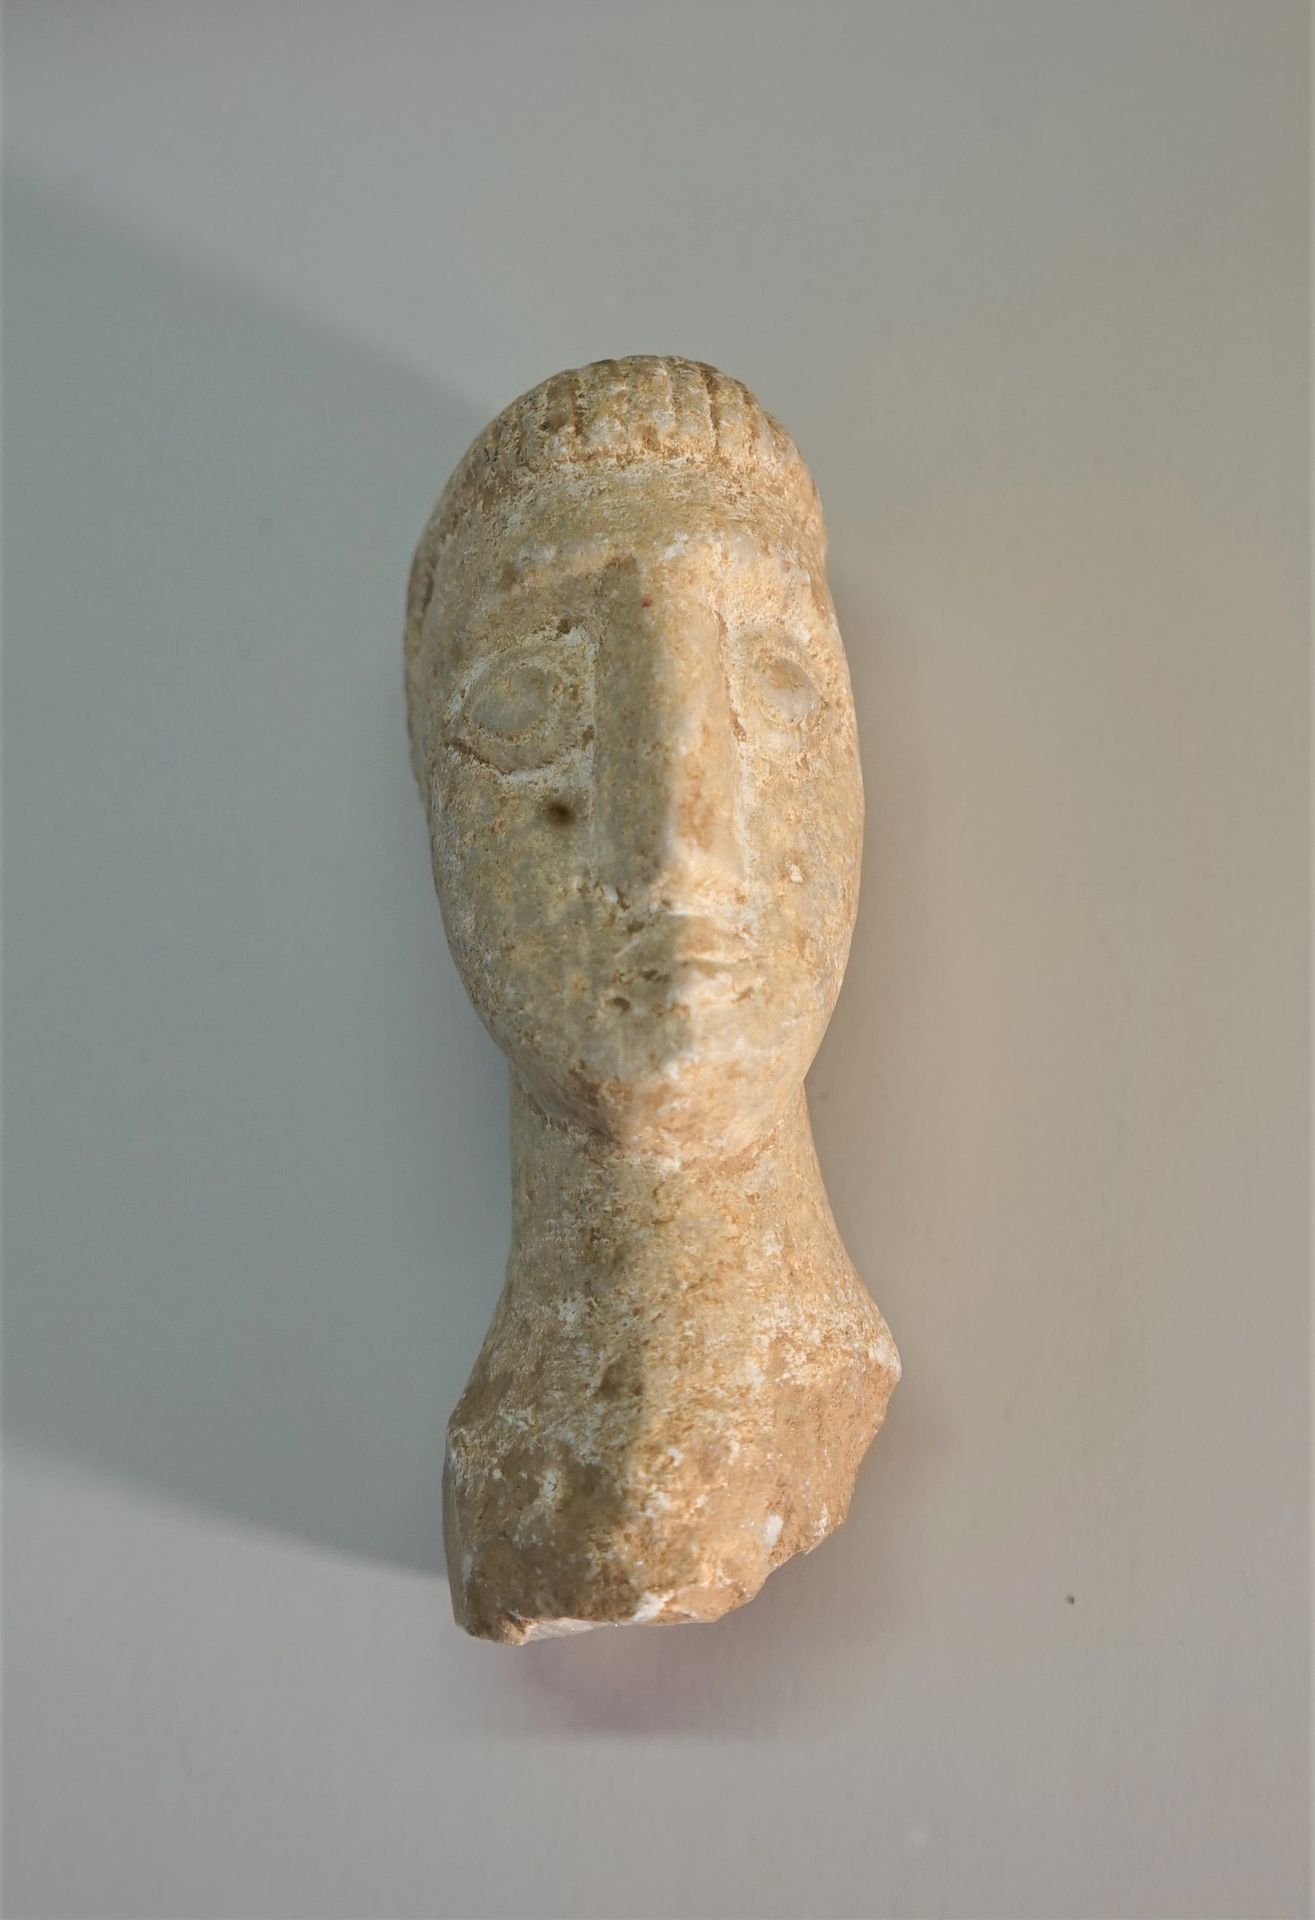 Null White stone (marble) head in Celtic style

11cm